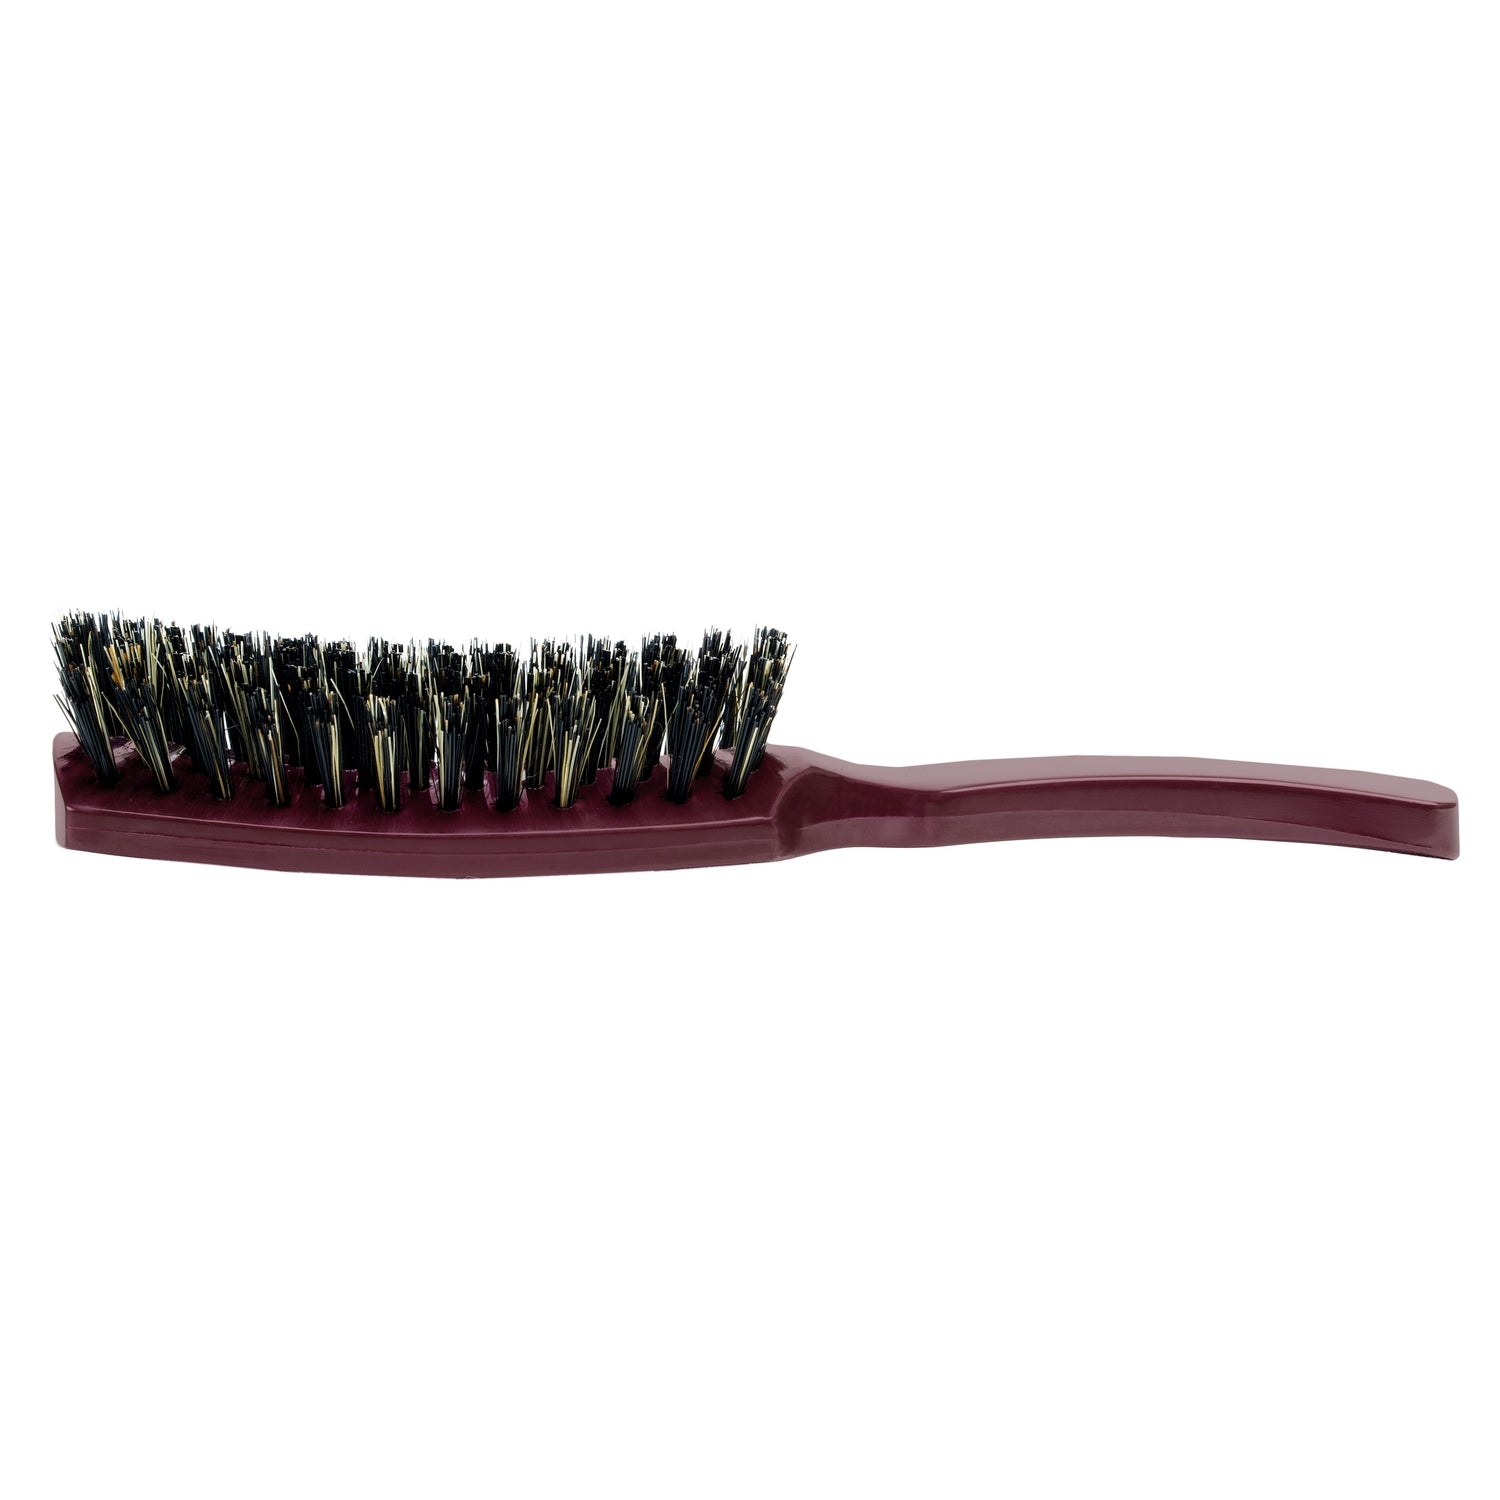 Nylon and Boar Bristle Professional Styling Hairbrush for all hair types - Mulberry Color-Hair Brushes-Fuller Brush Company